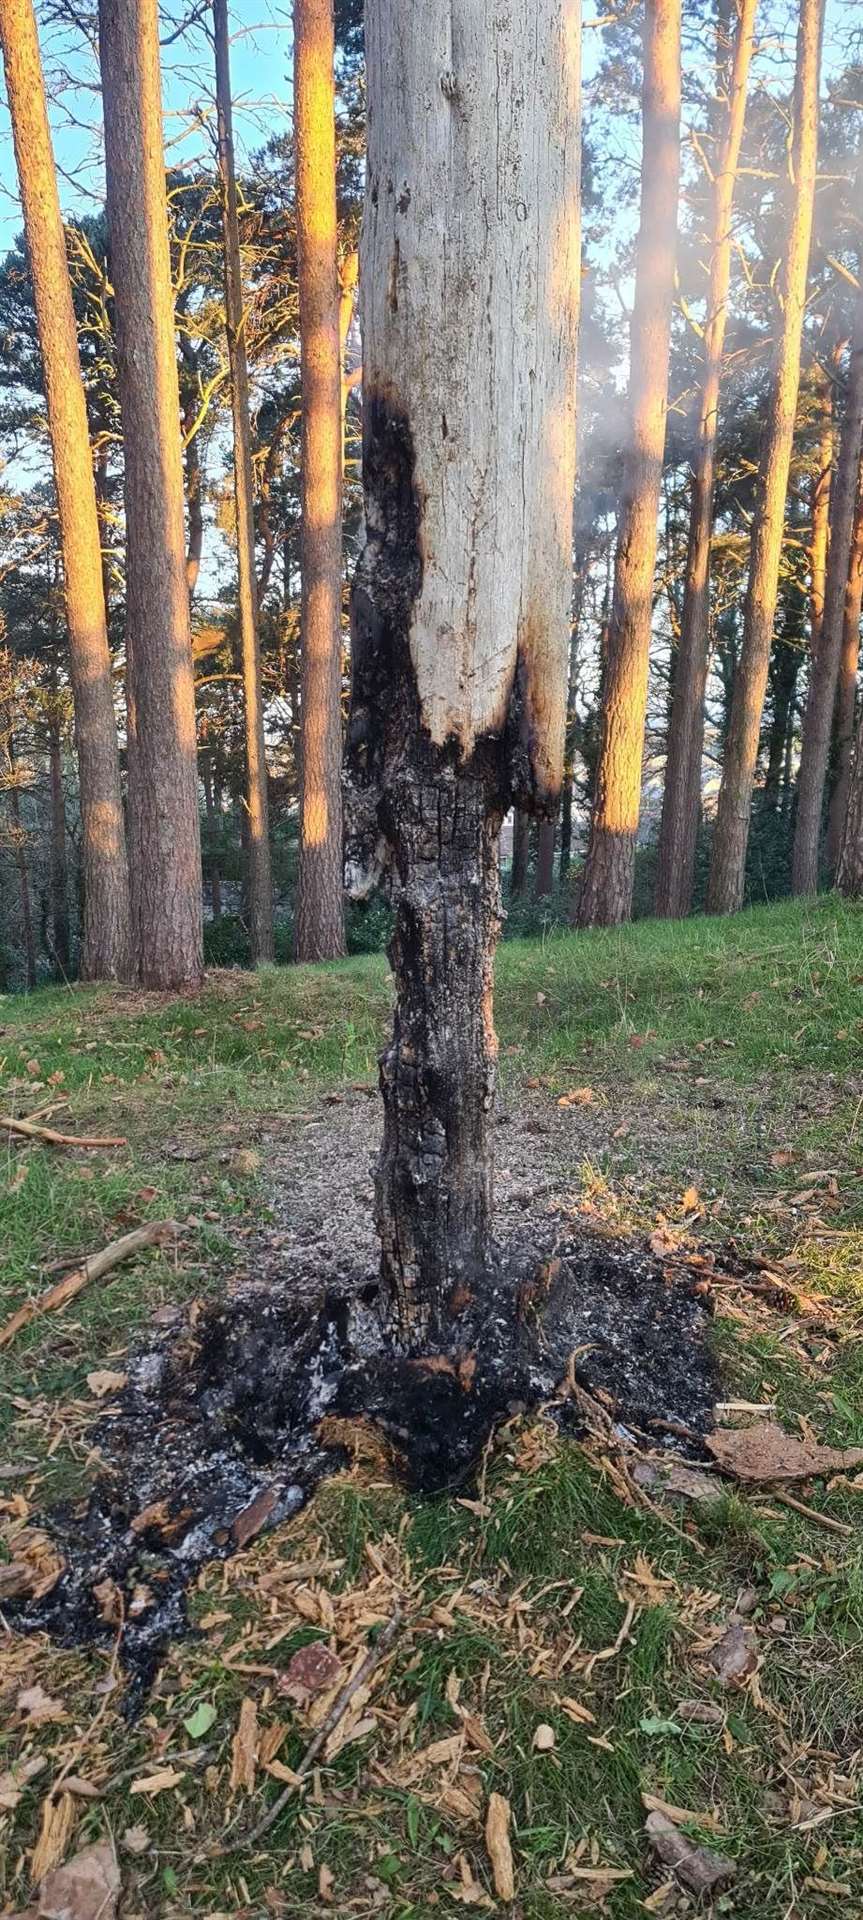 The smouldering tree a neighbour discovered in a rookery between Sanquhar and Mannachie.